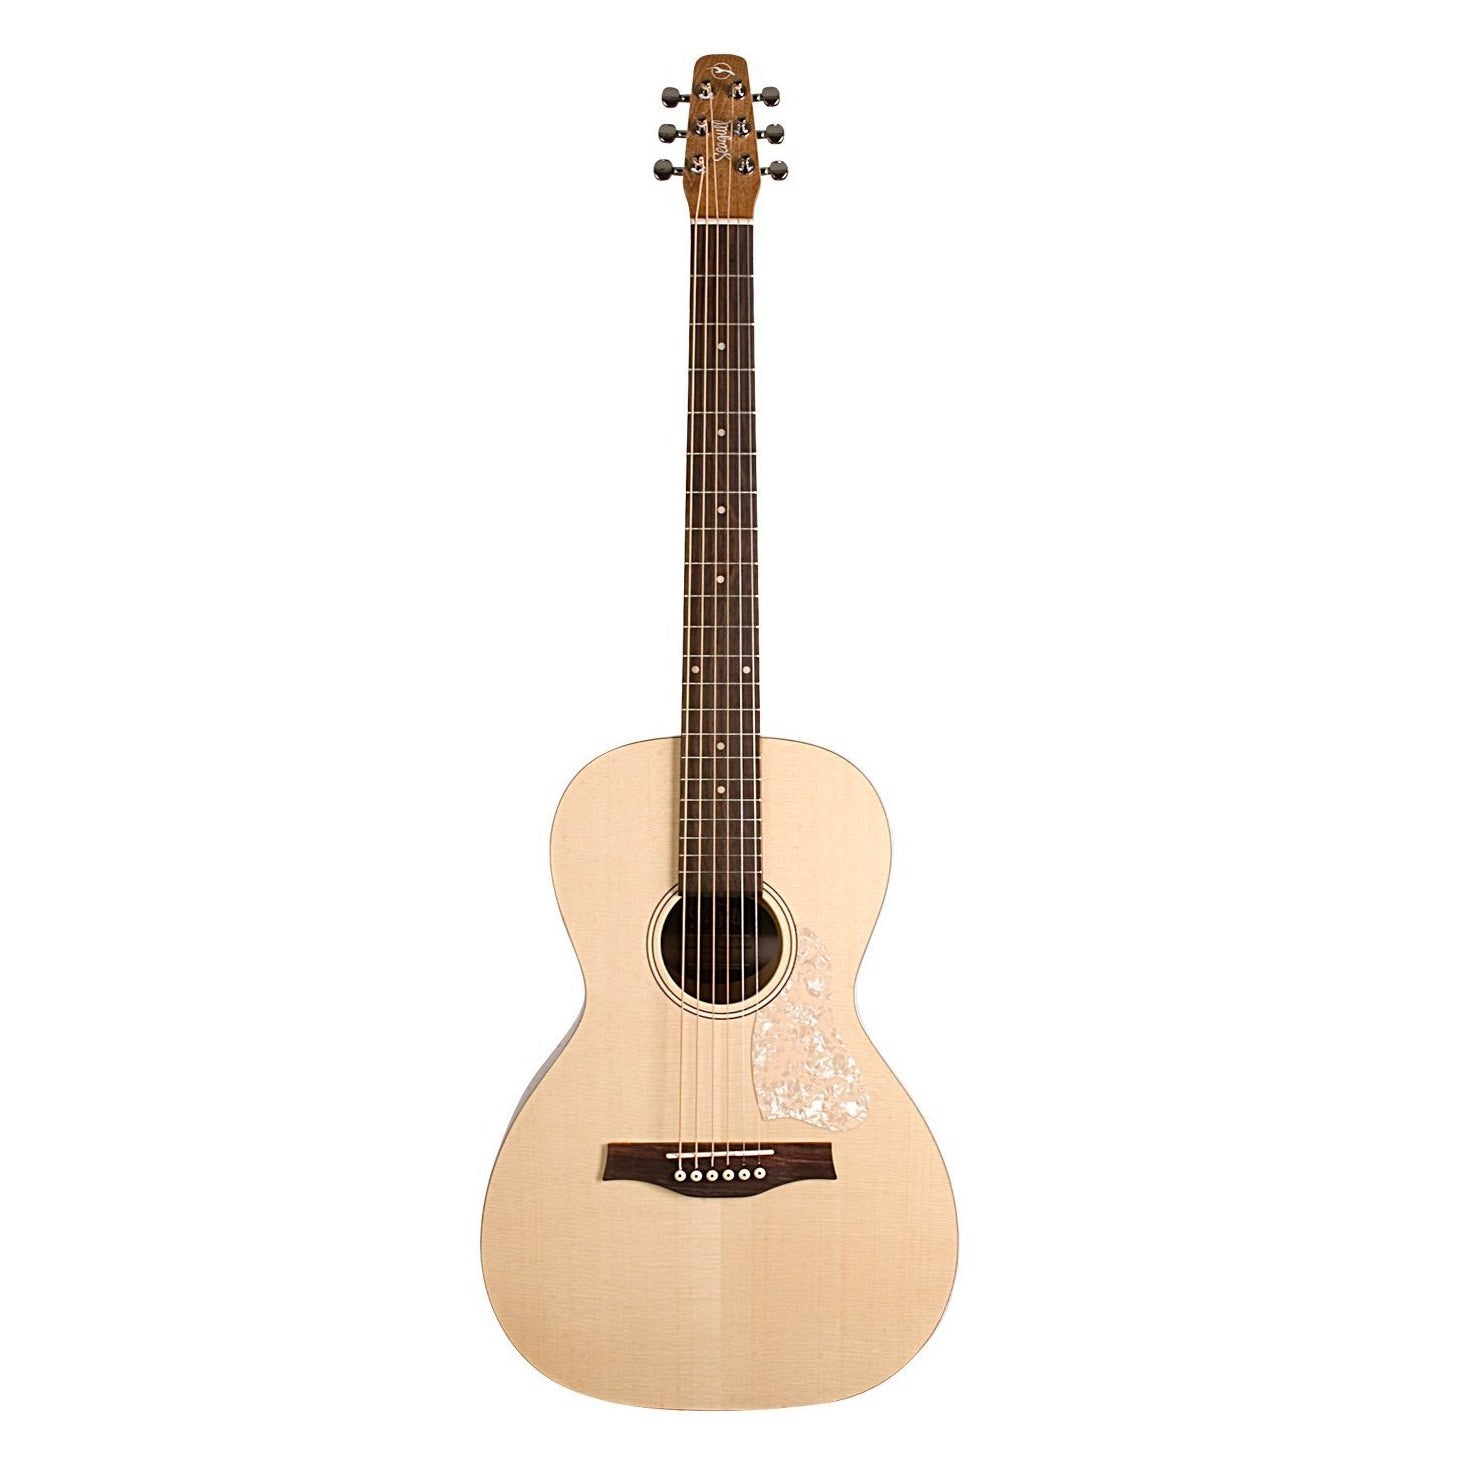 Seagull Entourage Grand Natural Almond Parlor Acoustic Guitar